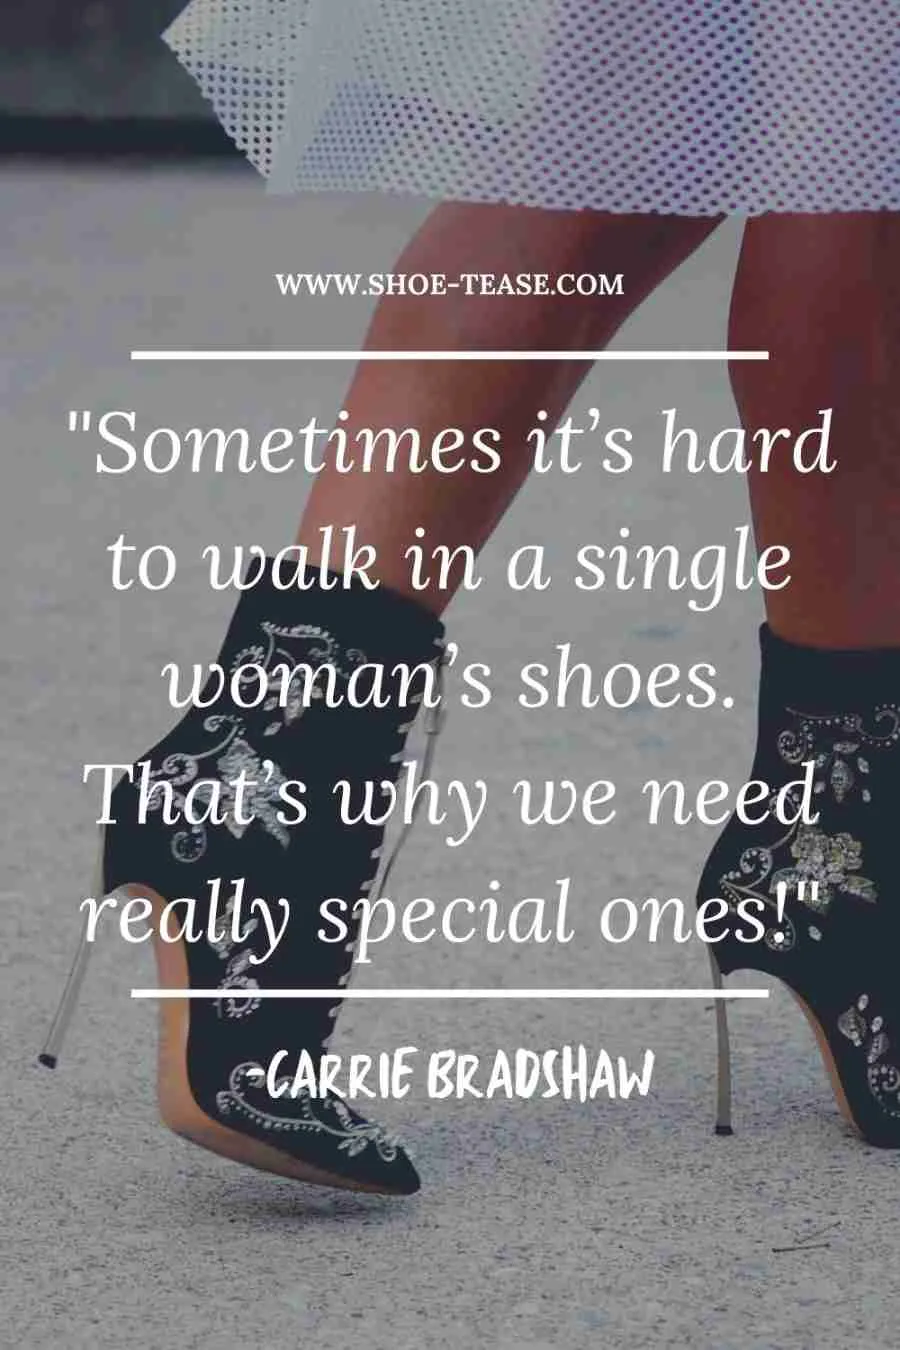 Carrie Bradshaw Shoe Quotes